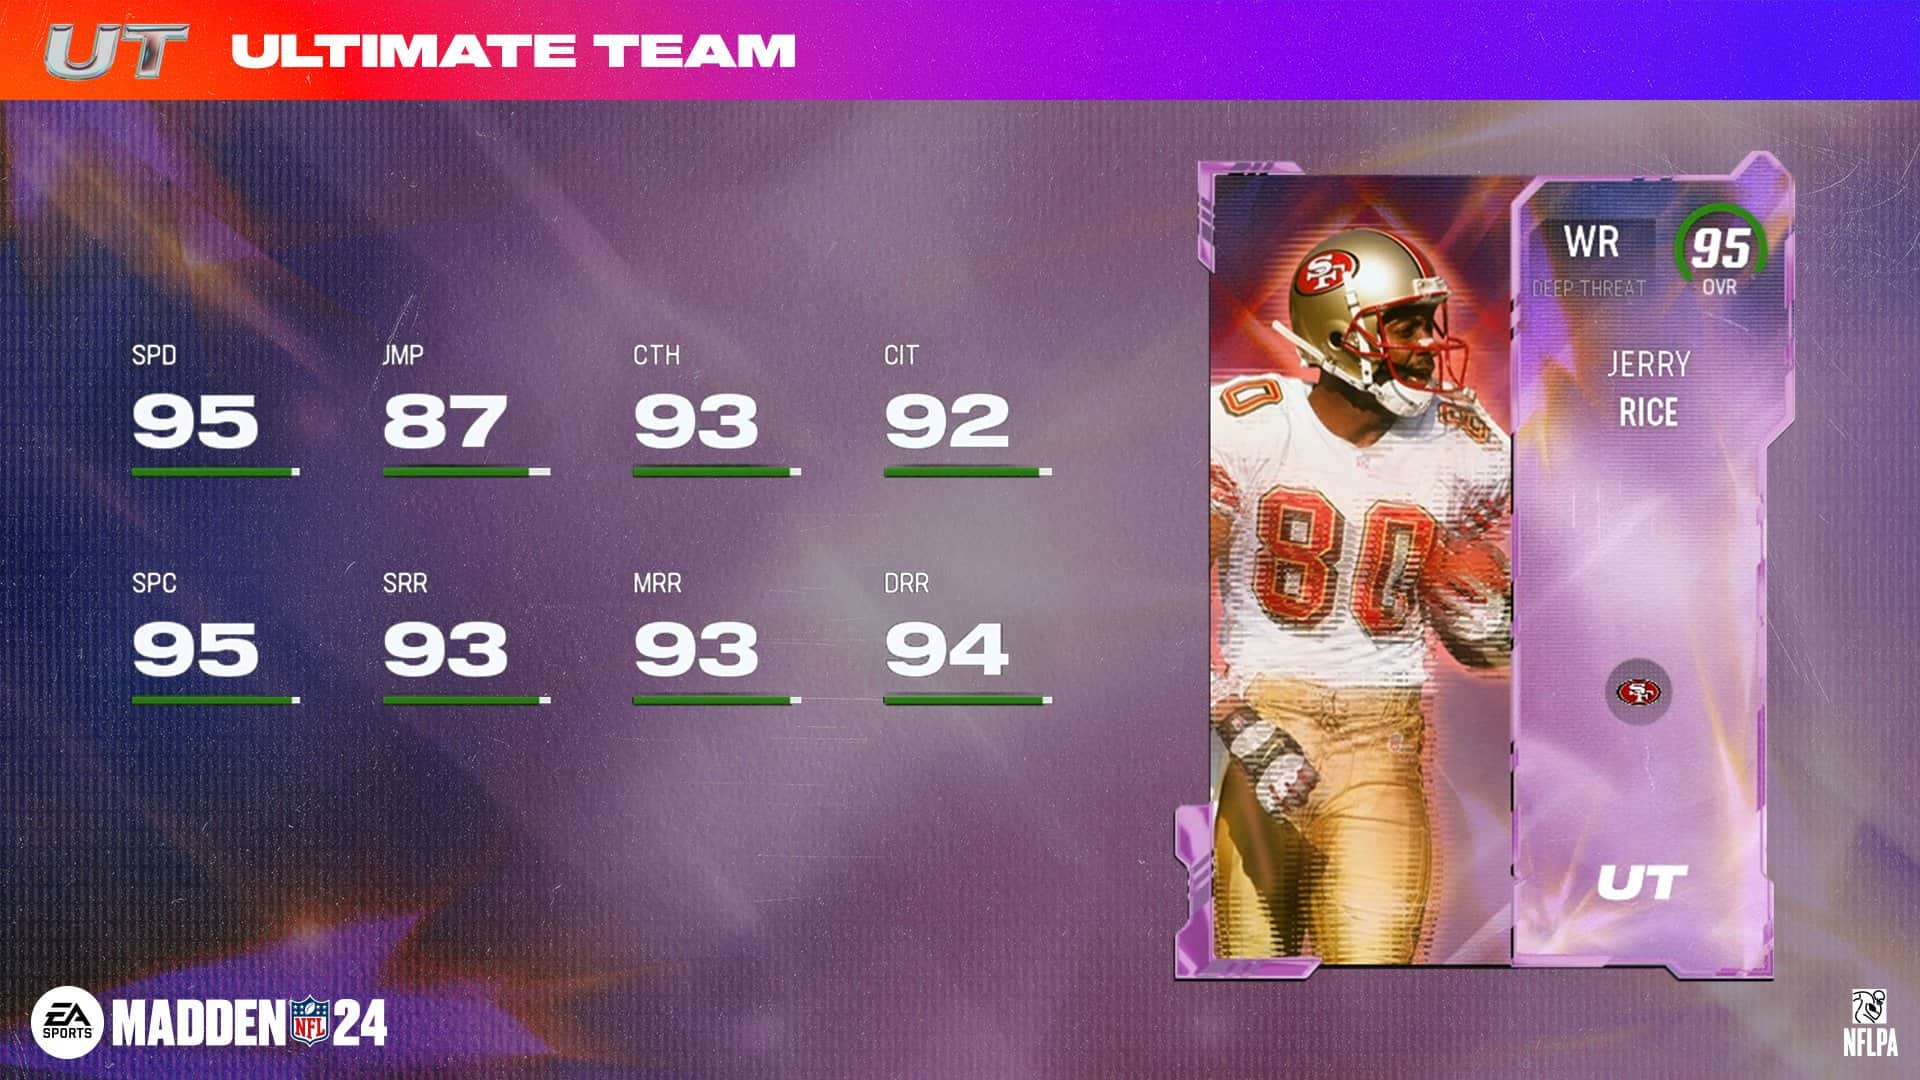 A screenshot of the ultimate team in Madden 24 Season 4.